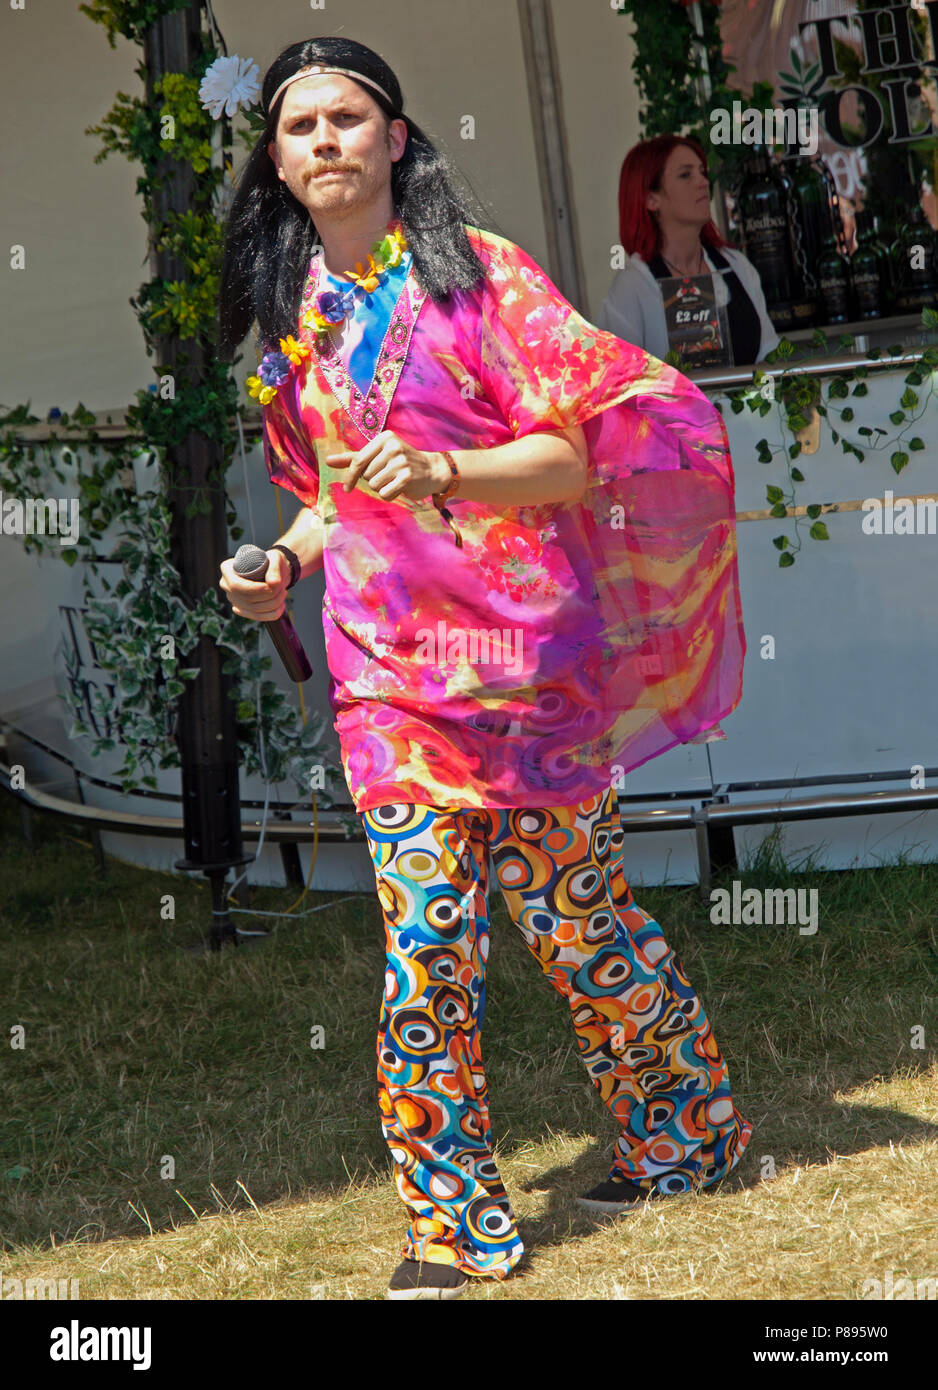 Dressed in hippy clothes a man enjoys himself at Love Supreme